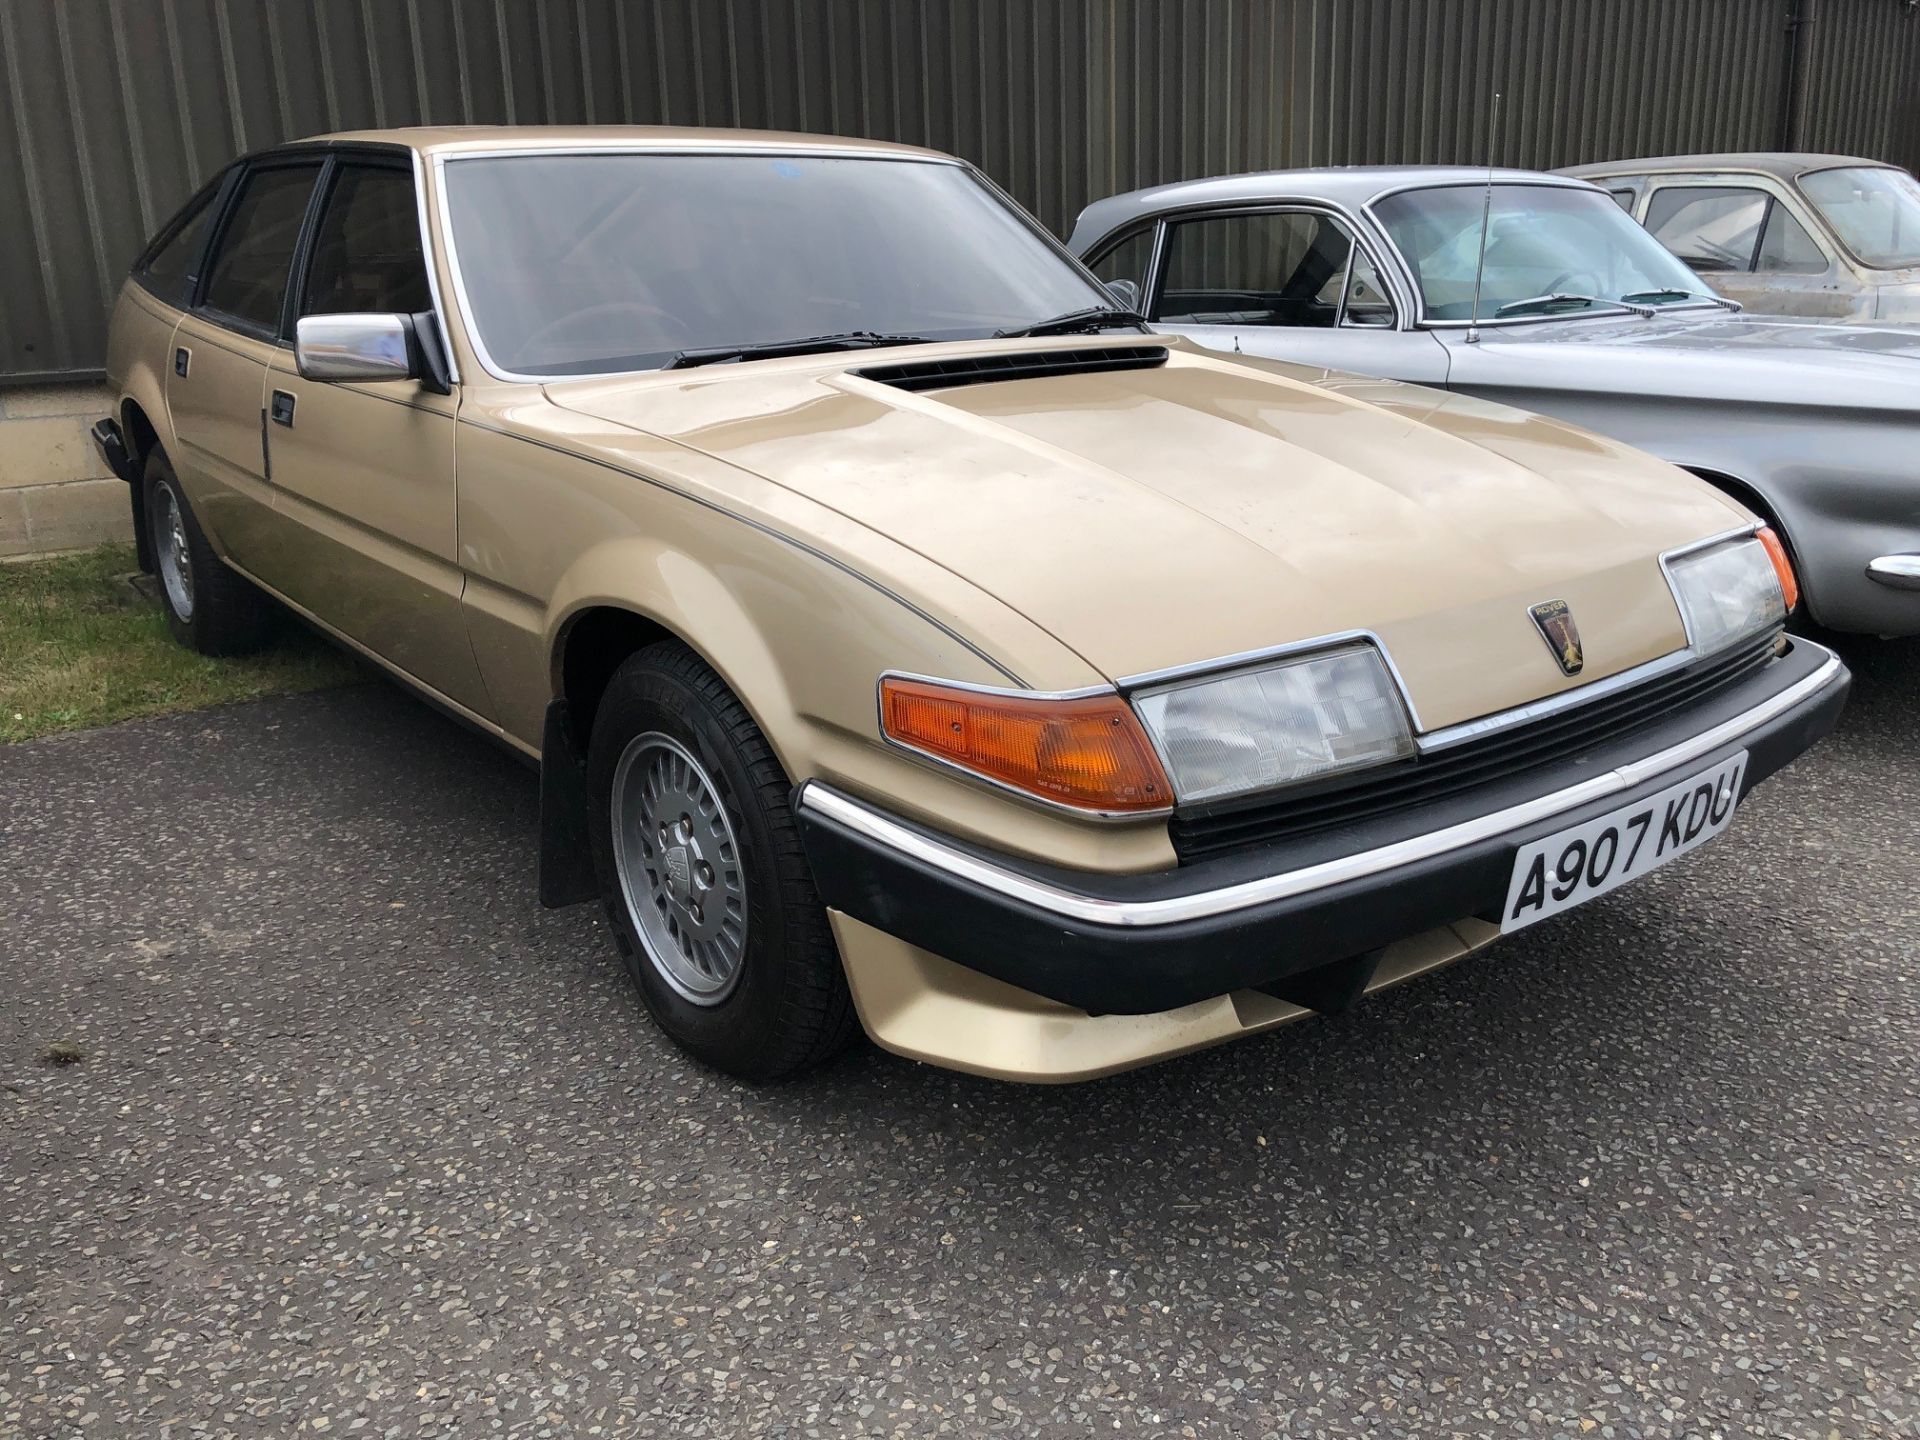 1984 Rover SD1 2300S Registration number A907 KDU Champagne Gold metallic Automatic Low miles